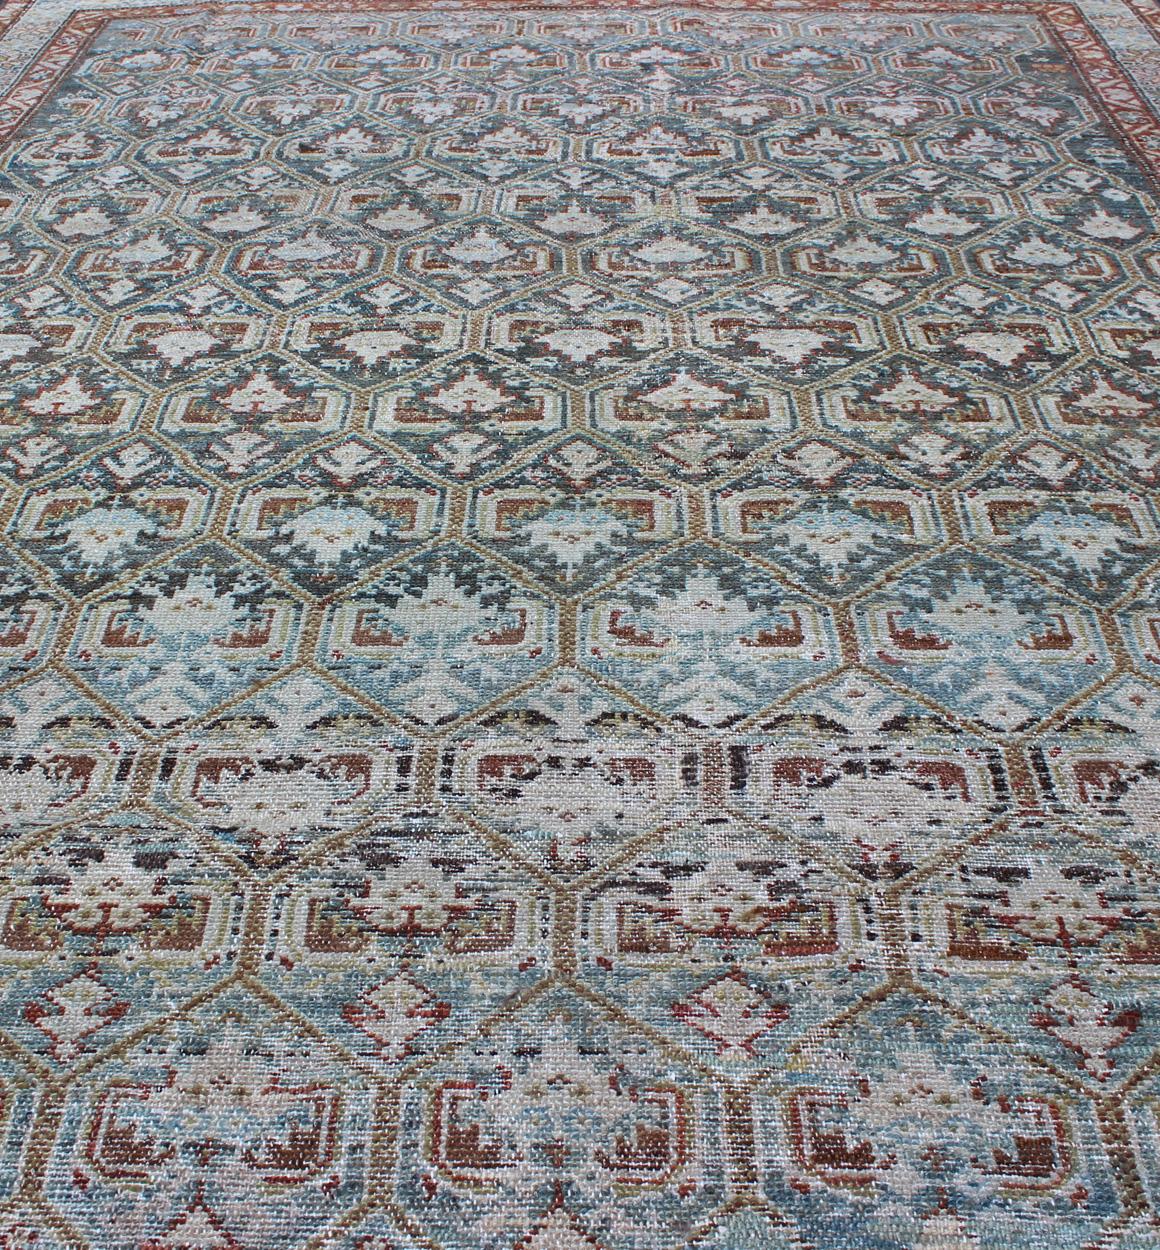 Antique Persian Fine Senneh Distressed Rug with All-Over Geometric Design 3